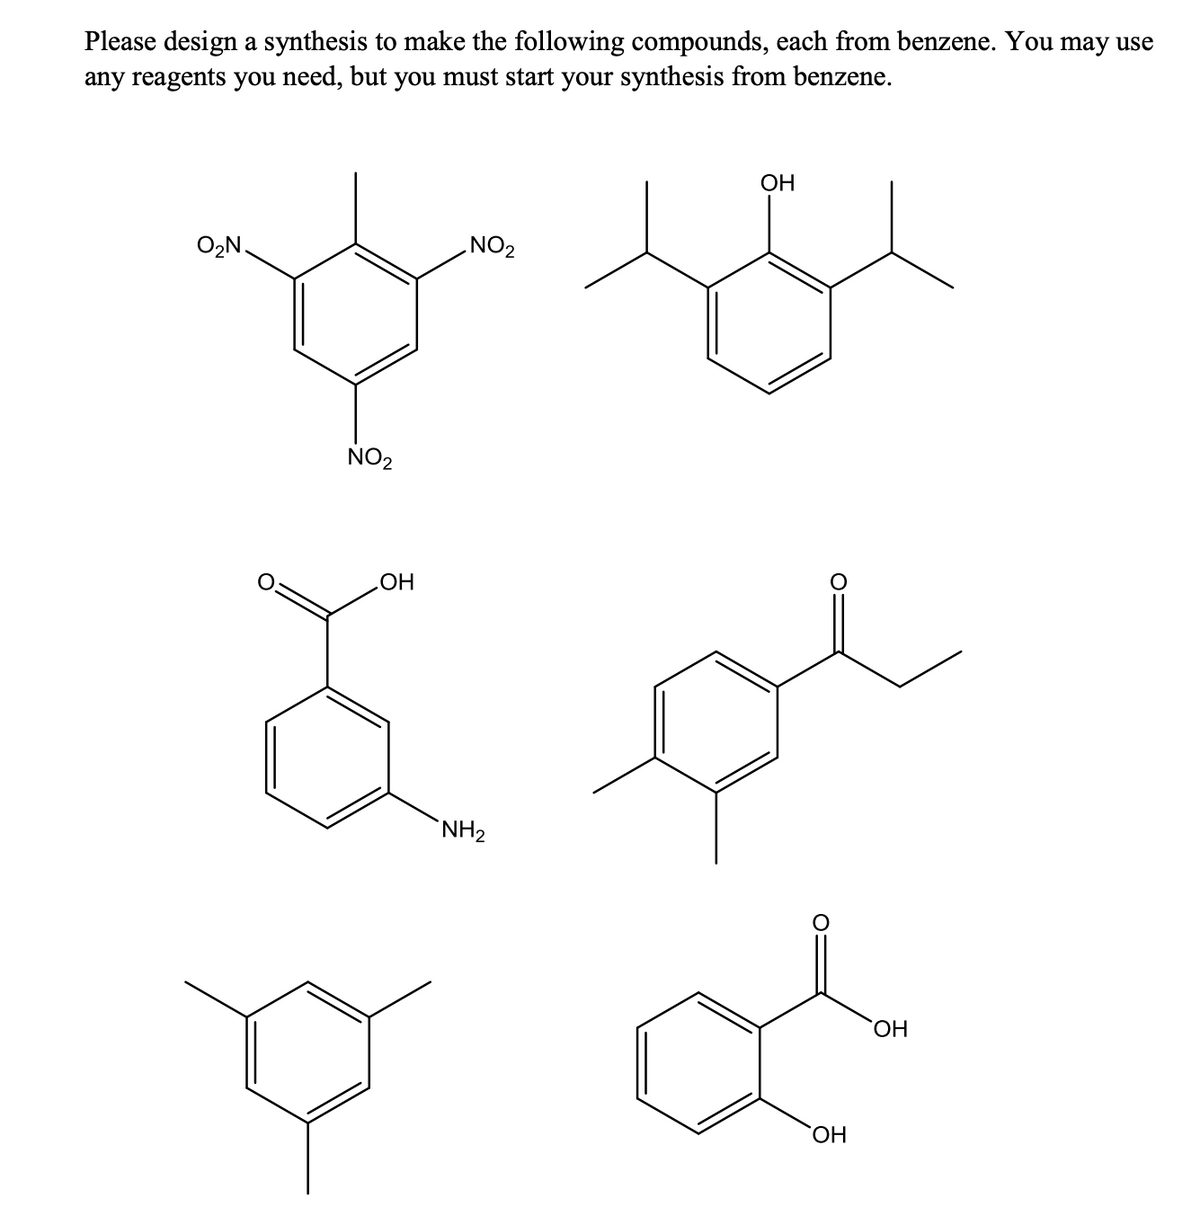 Please design a synthesis to make the following compounds, each from benzene. You may use
any reagents you need, but you must start your synthesis from benzene.
O₂N.
NO₂
OH
NO₂
NH₂
OH
OH
OH